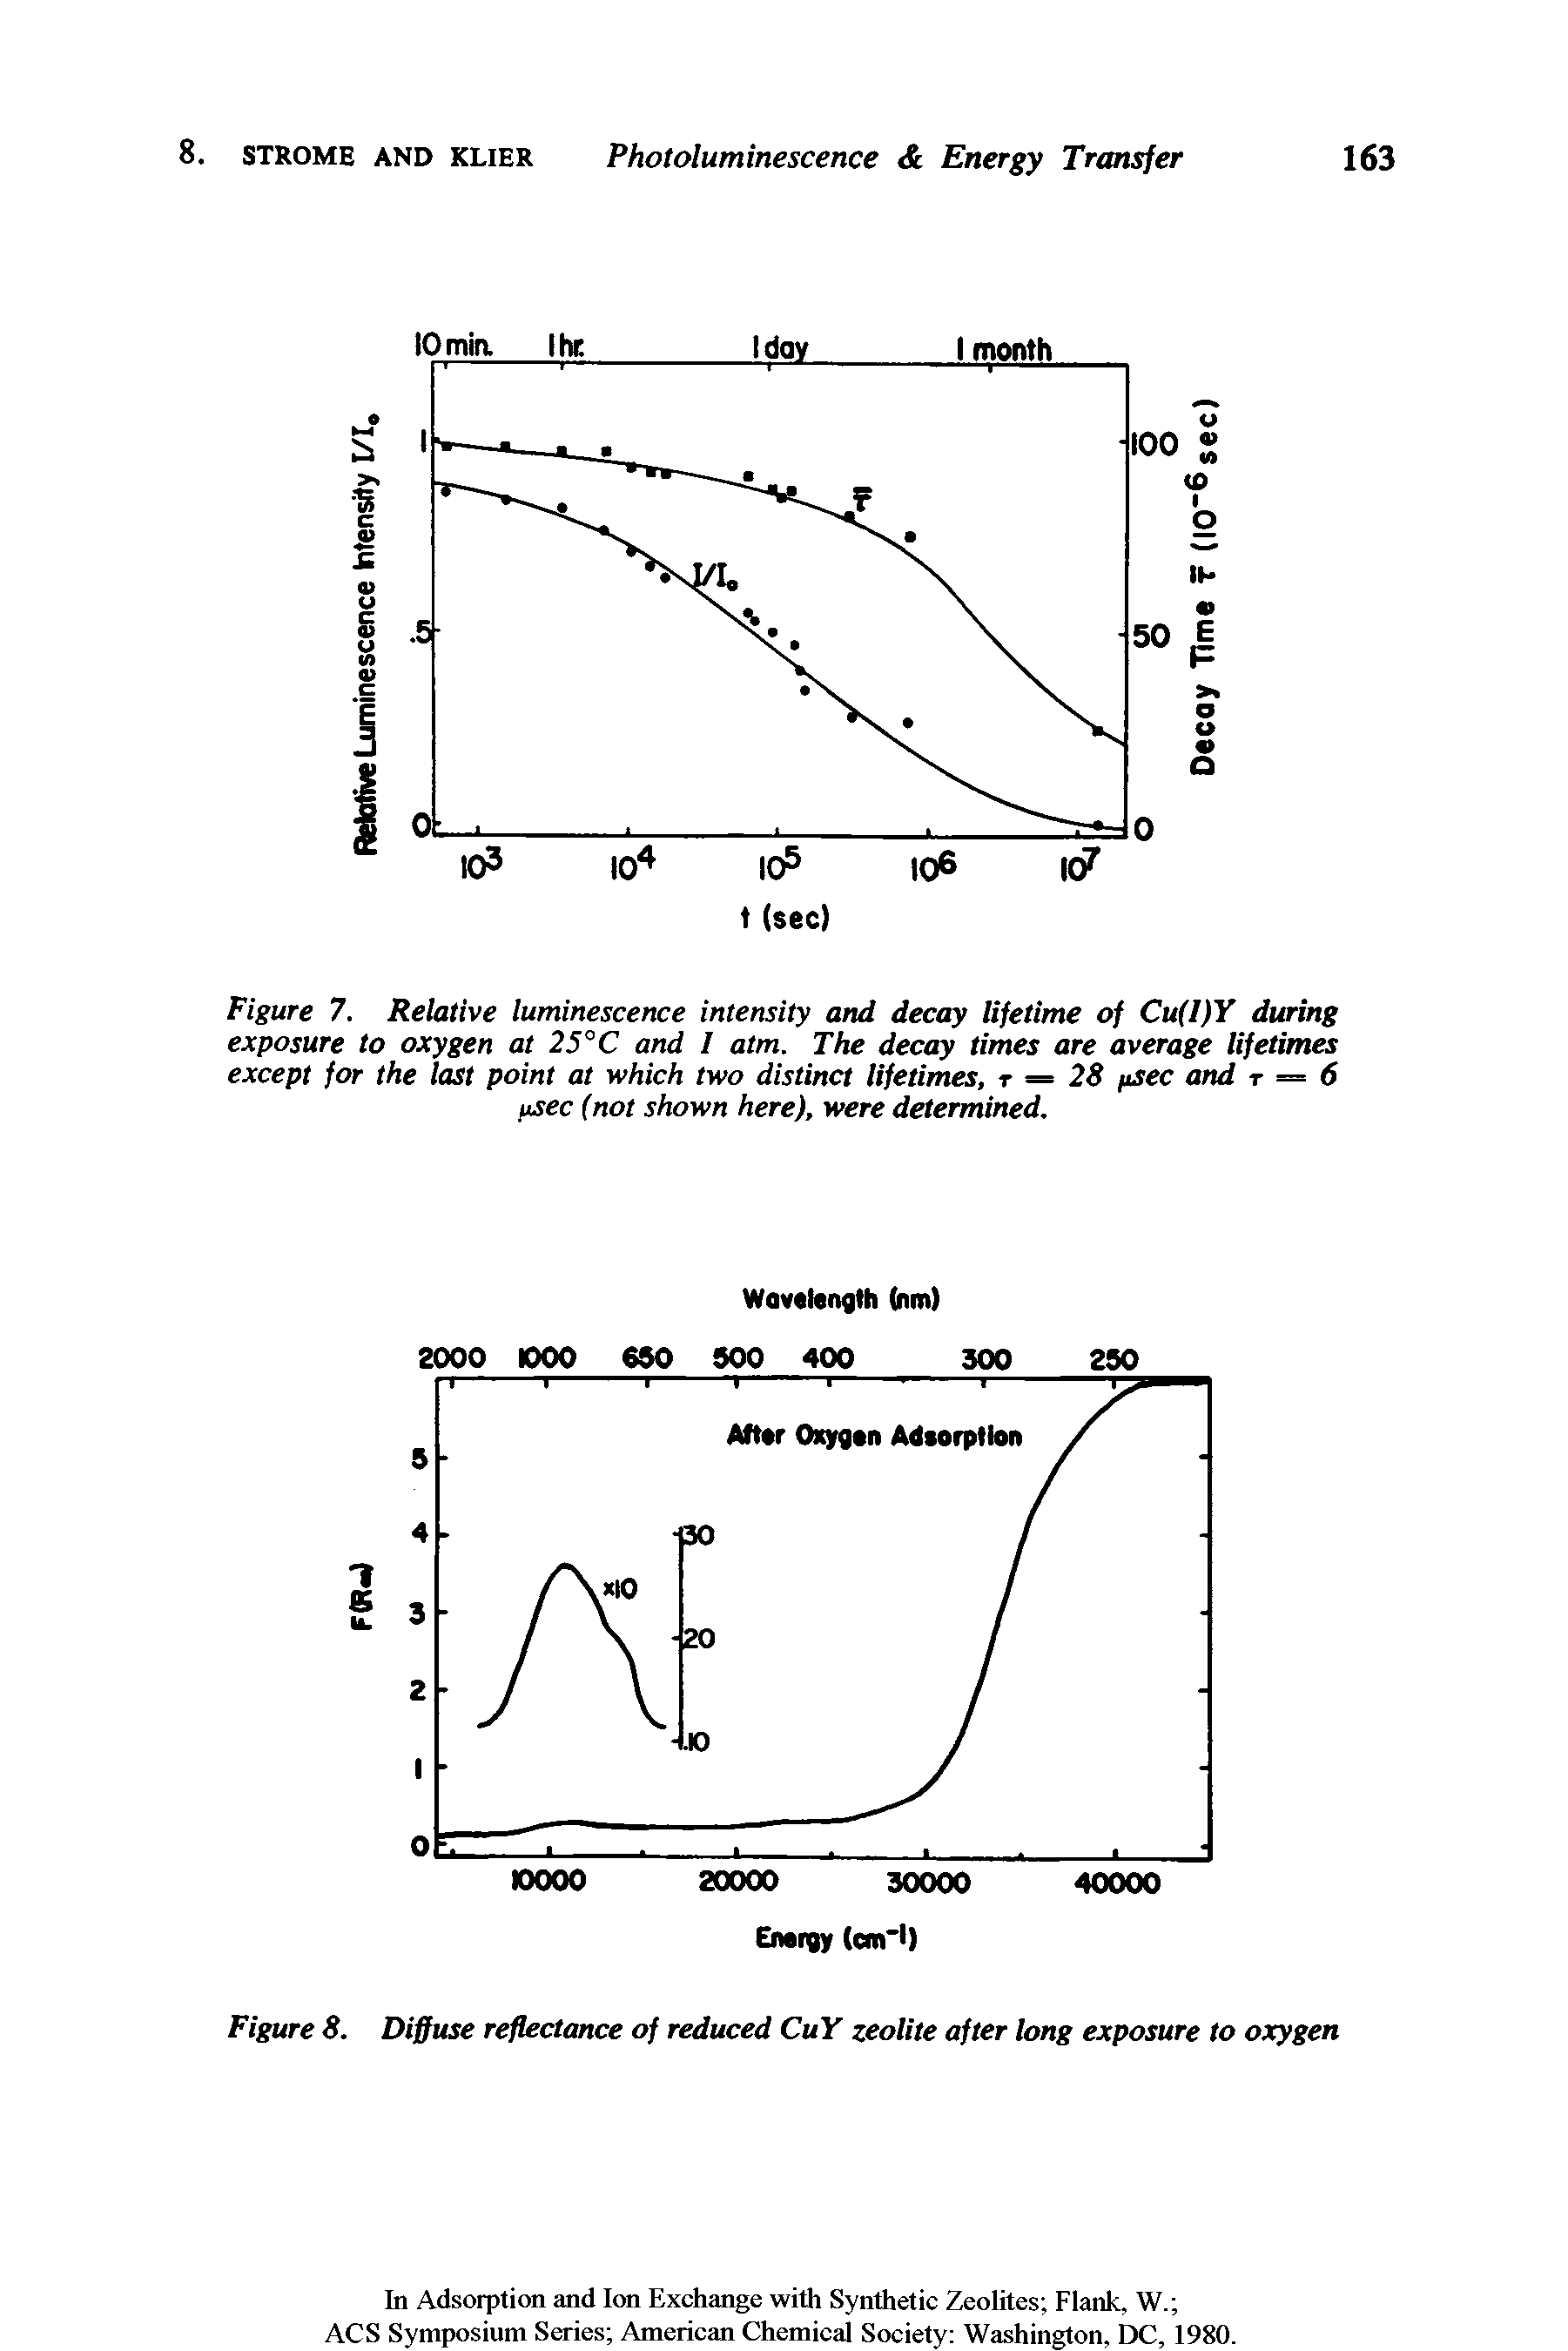 Figure 7. Relative luminescence intensity and decay lifetime of Cu(I)Y during exposure to oxygen at 25°C and I atm. The decay times are average lifetimes except for the last point at which two distinct lifetimes, t = 28 /isec and r = 6 ysec (not shown here), were determined.